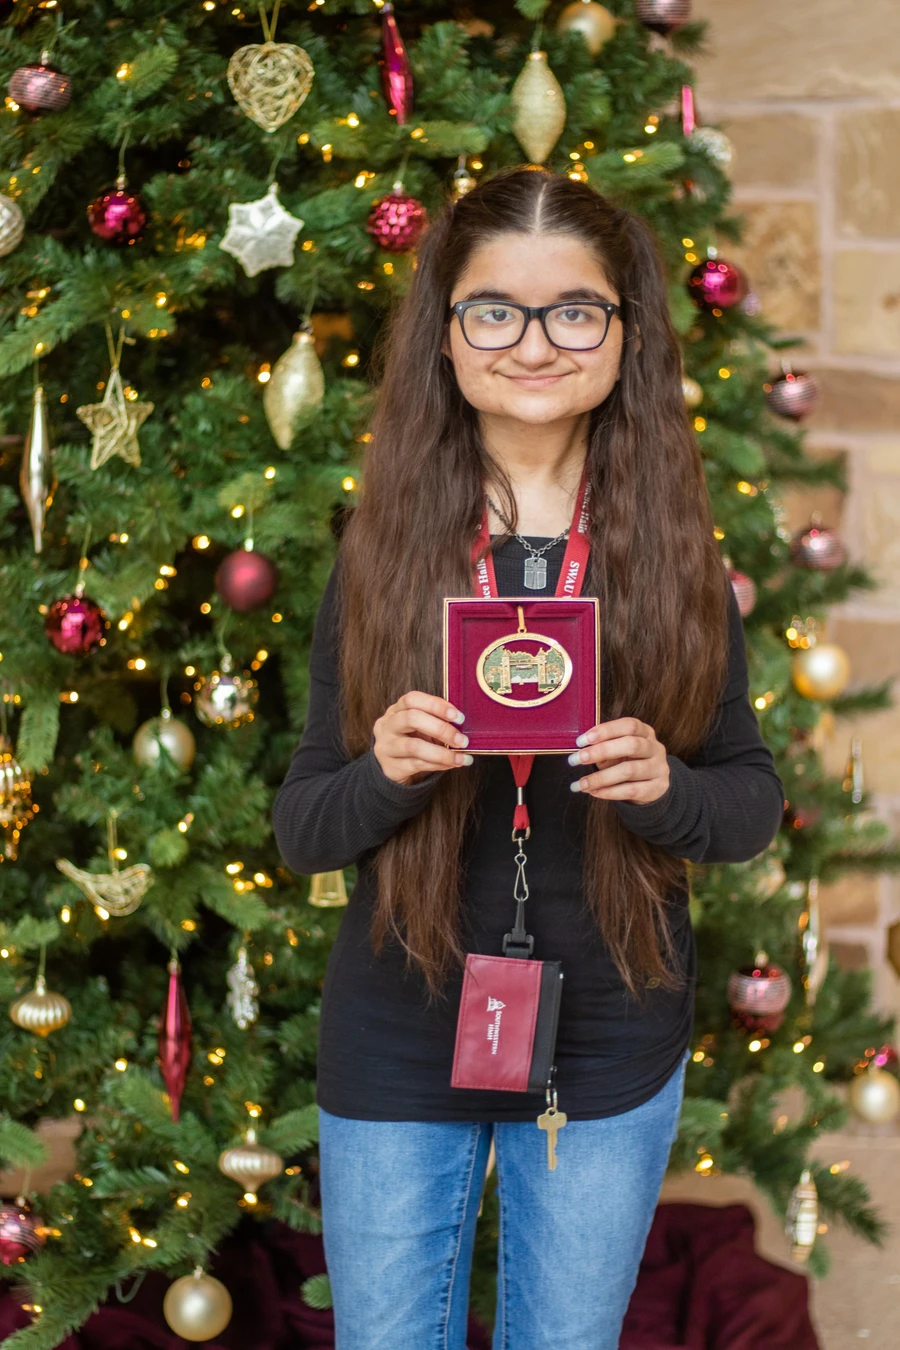 Caroline Torres poses in front of a Christmas tree holding a box containing the Mizpah ornament